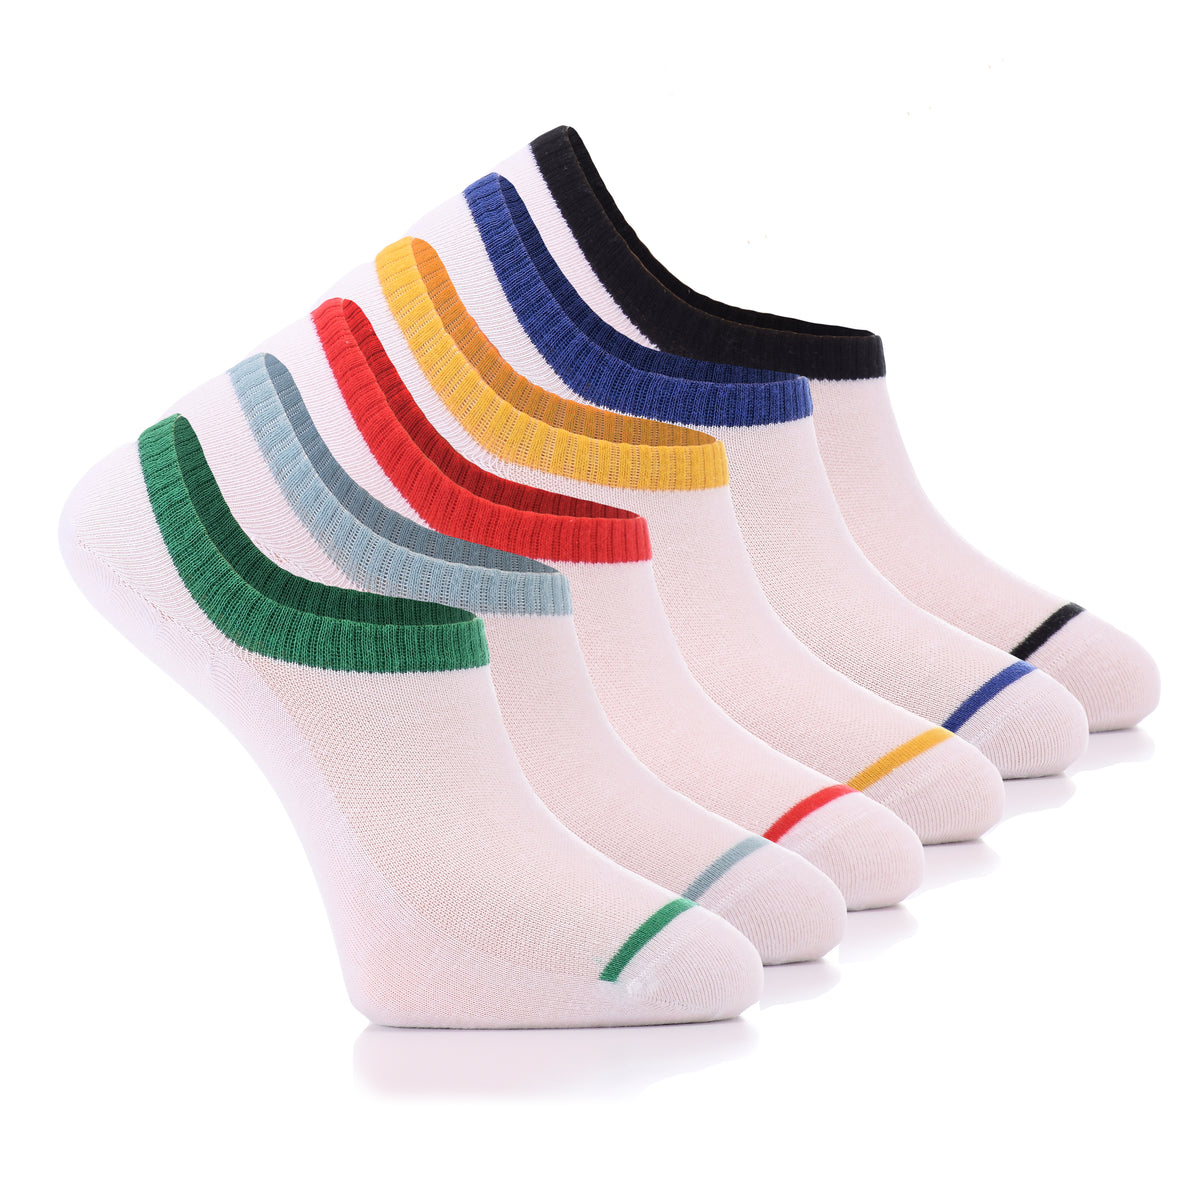 These Patterned Cotton No-Show Men's Socks feature six white socks with colorful stripes, perfect for adding color to any outfit.